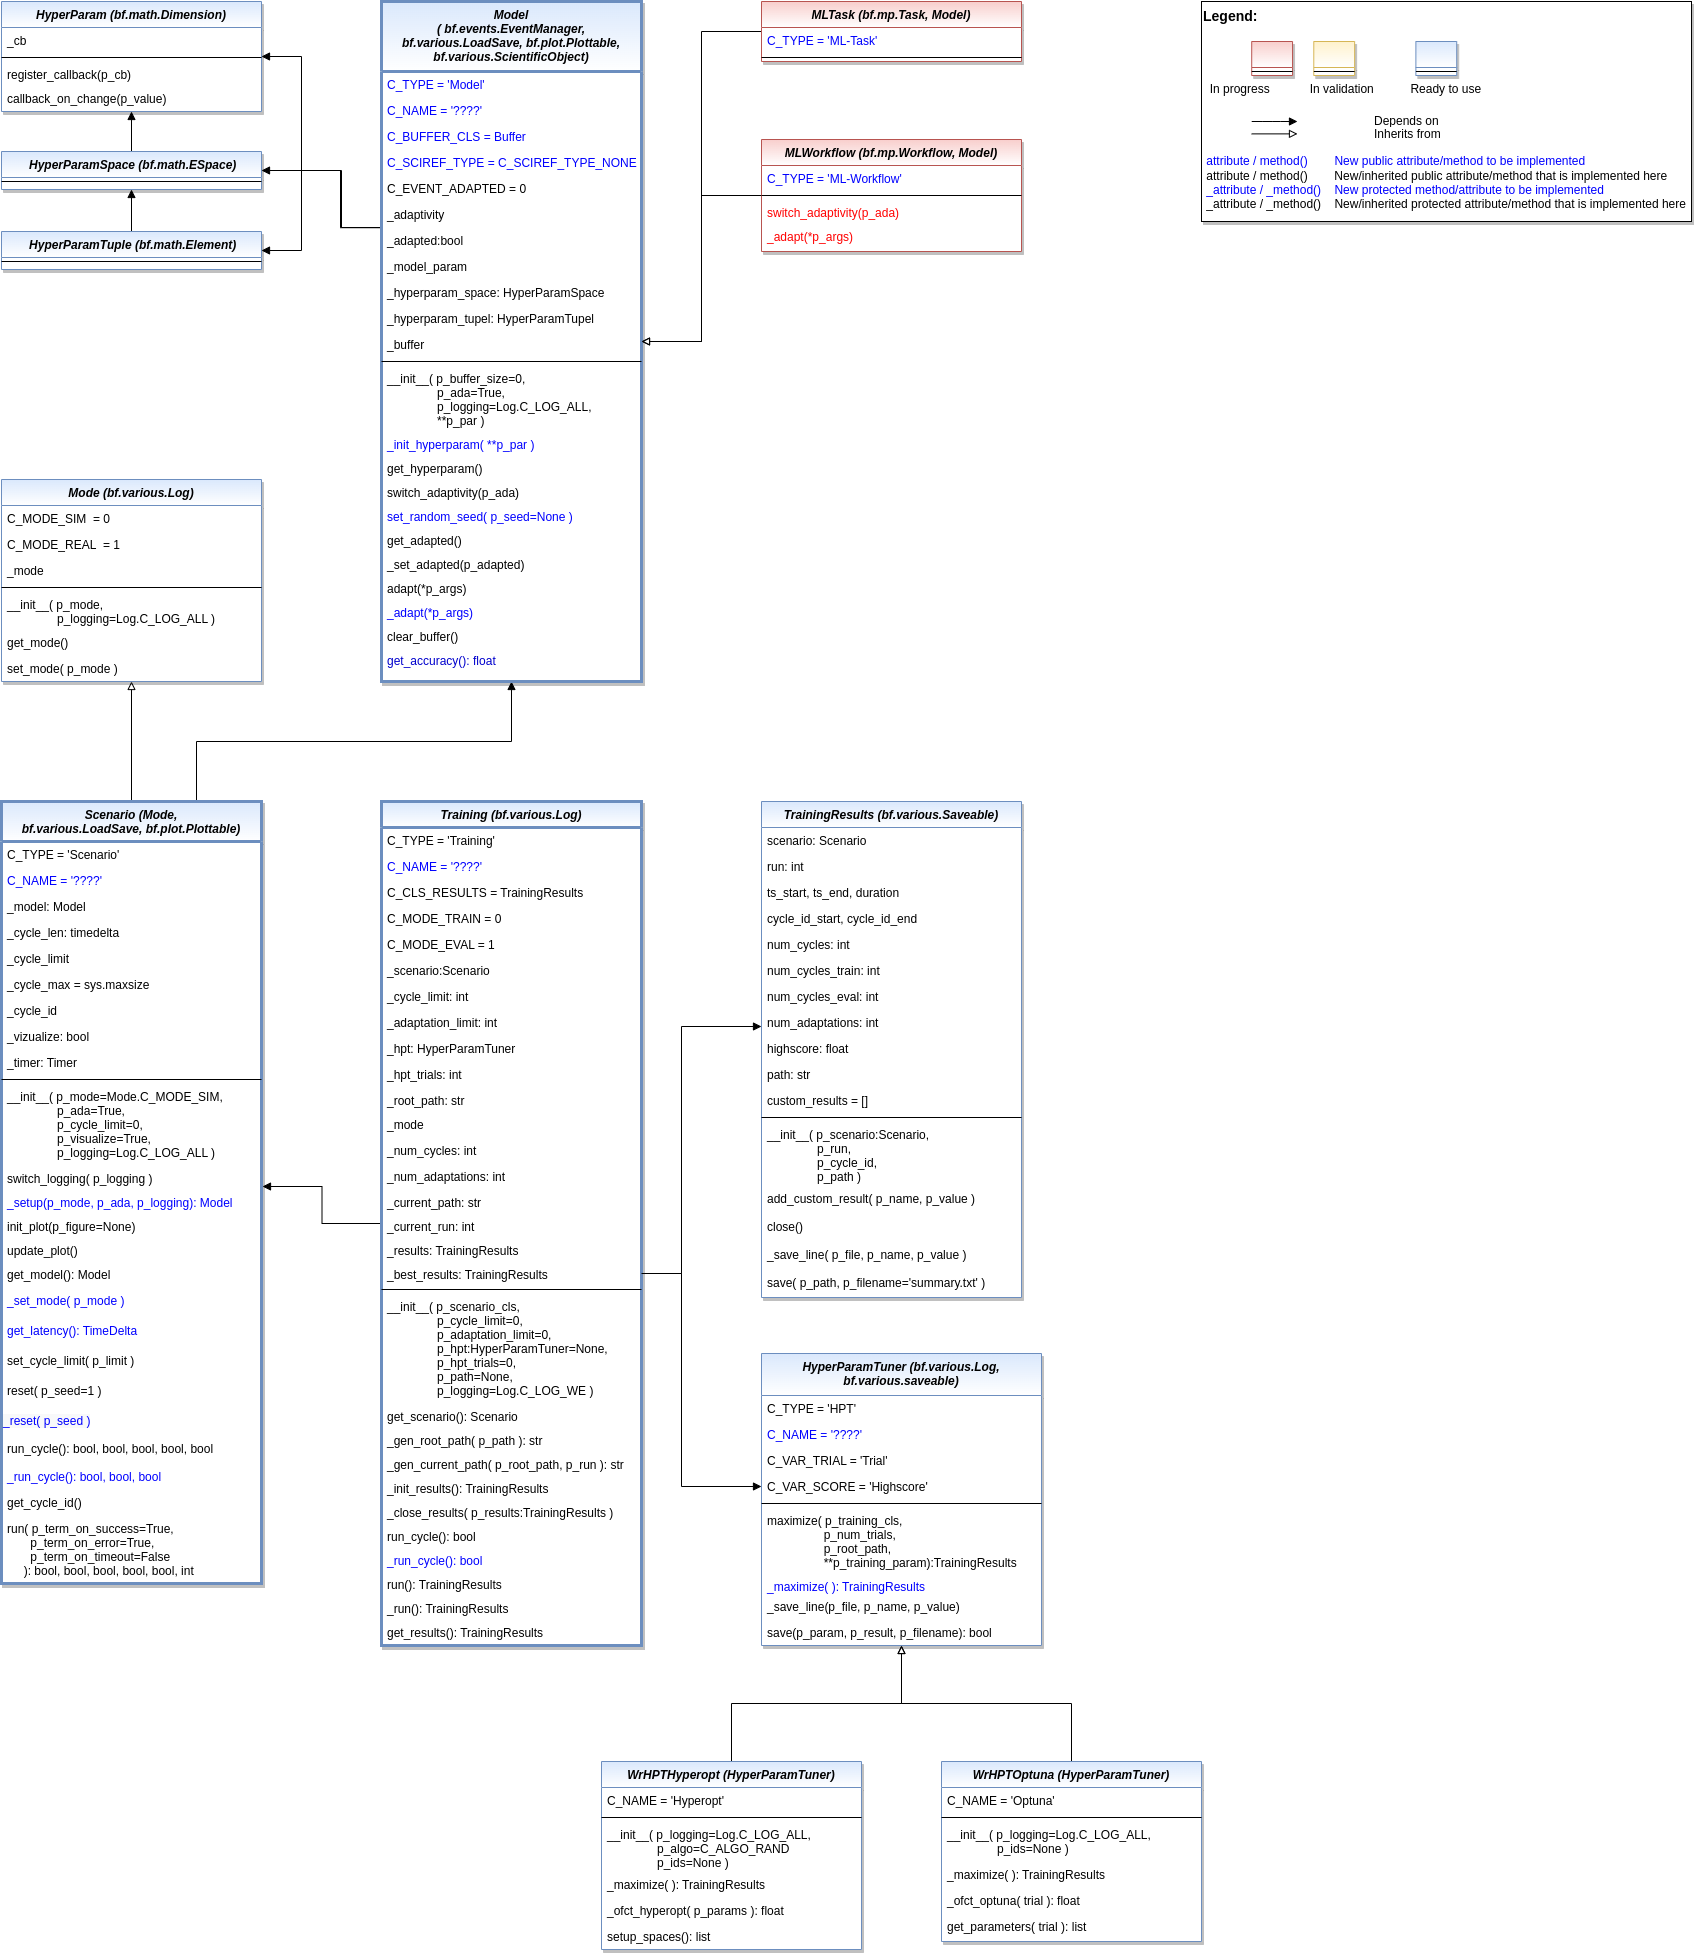 ../../../_images/MLPro-BF-ML_class_diagram.drawio.png